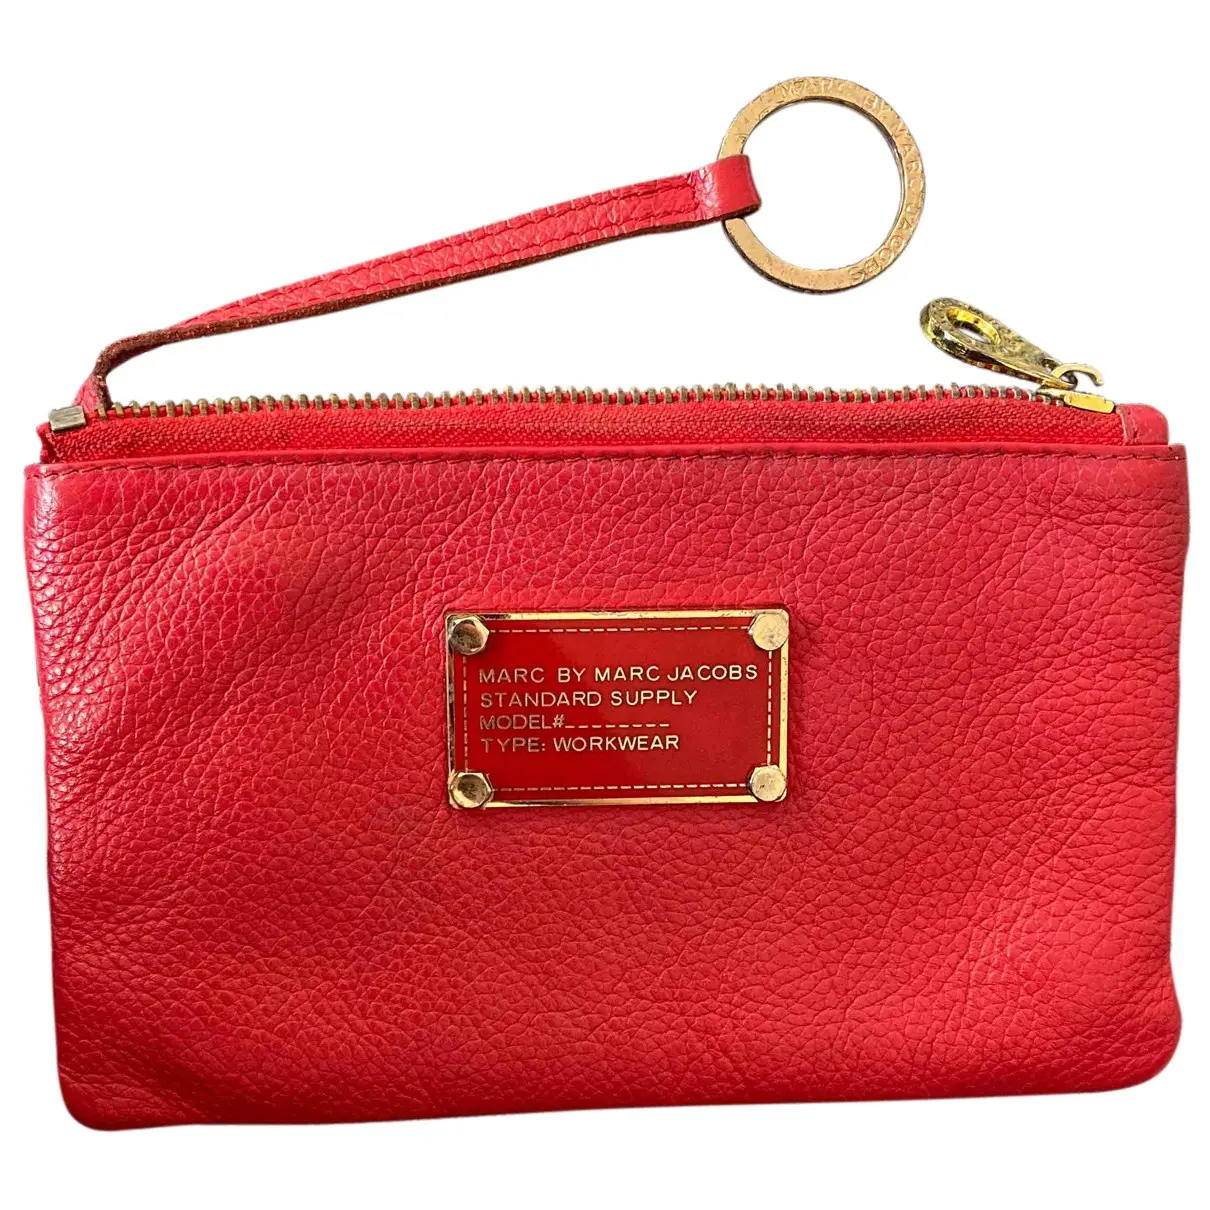 Leather clutch bag Marc by Marc Jacobs